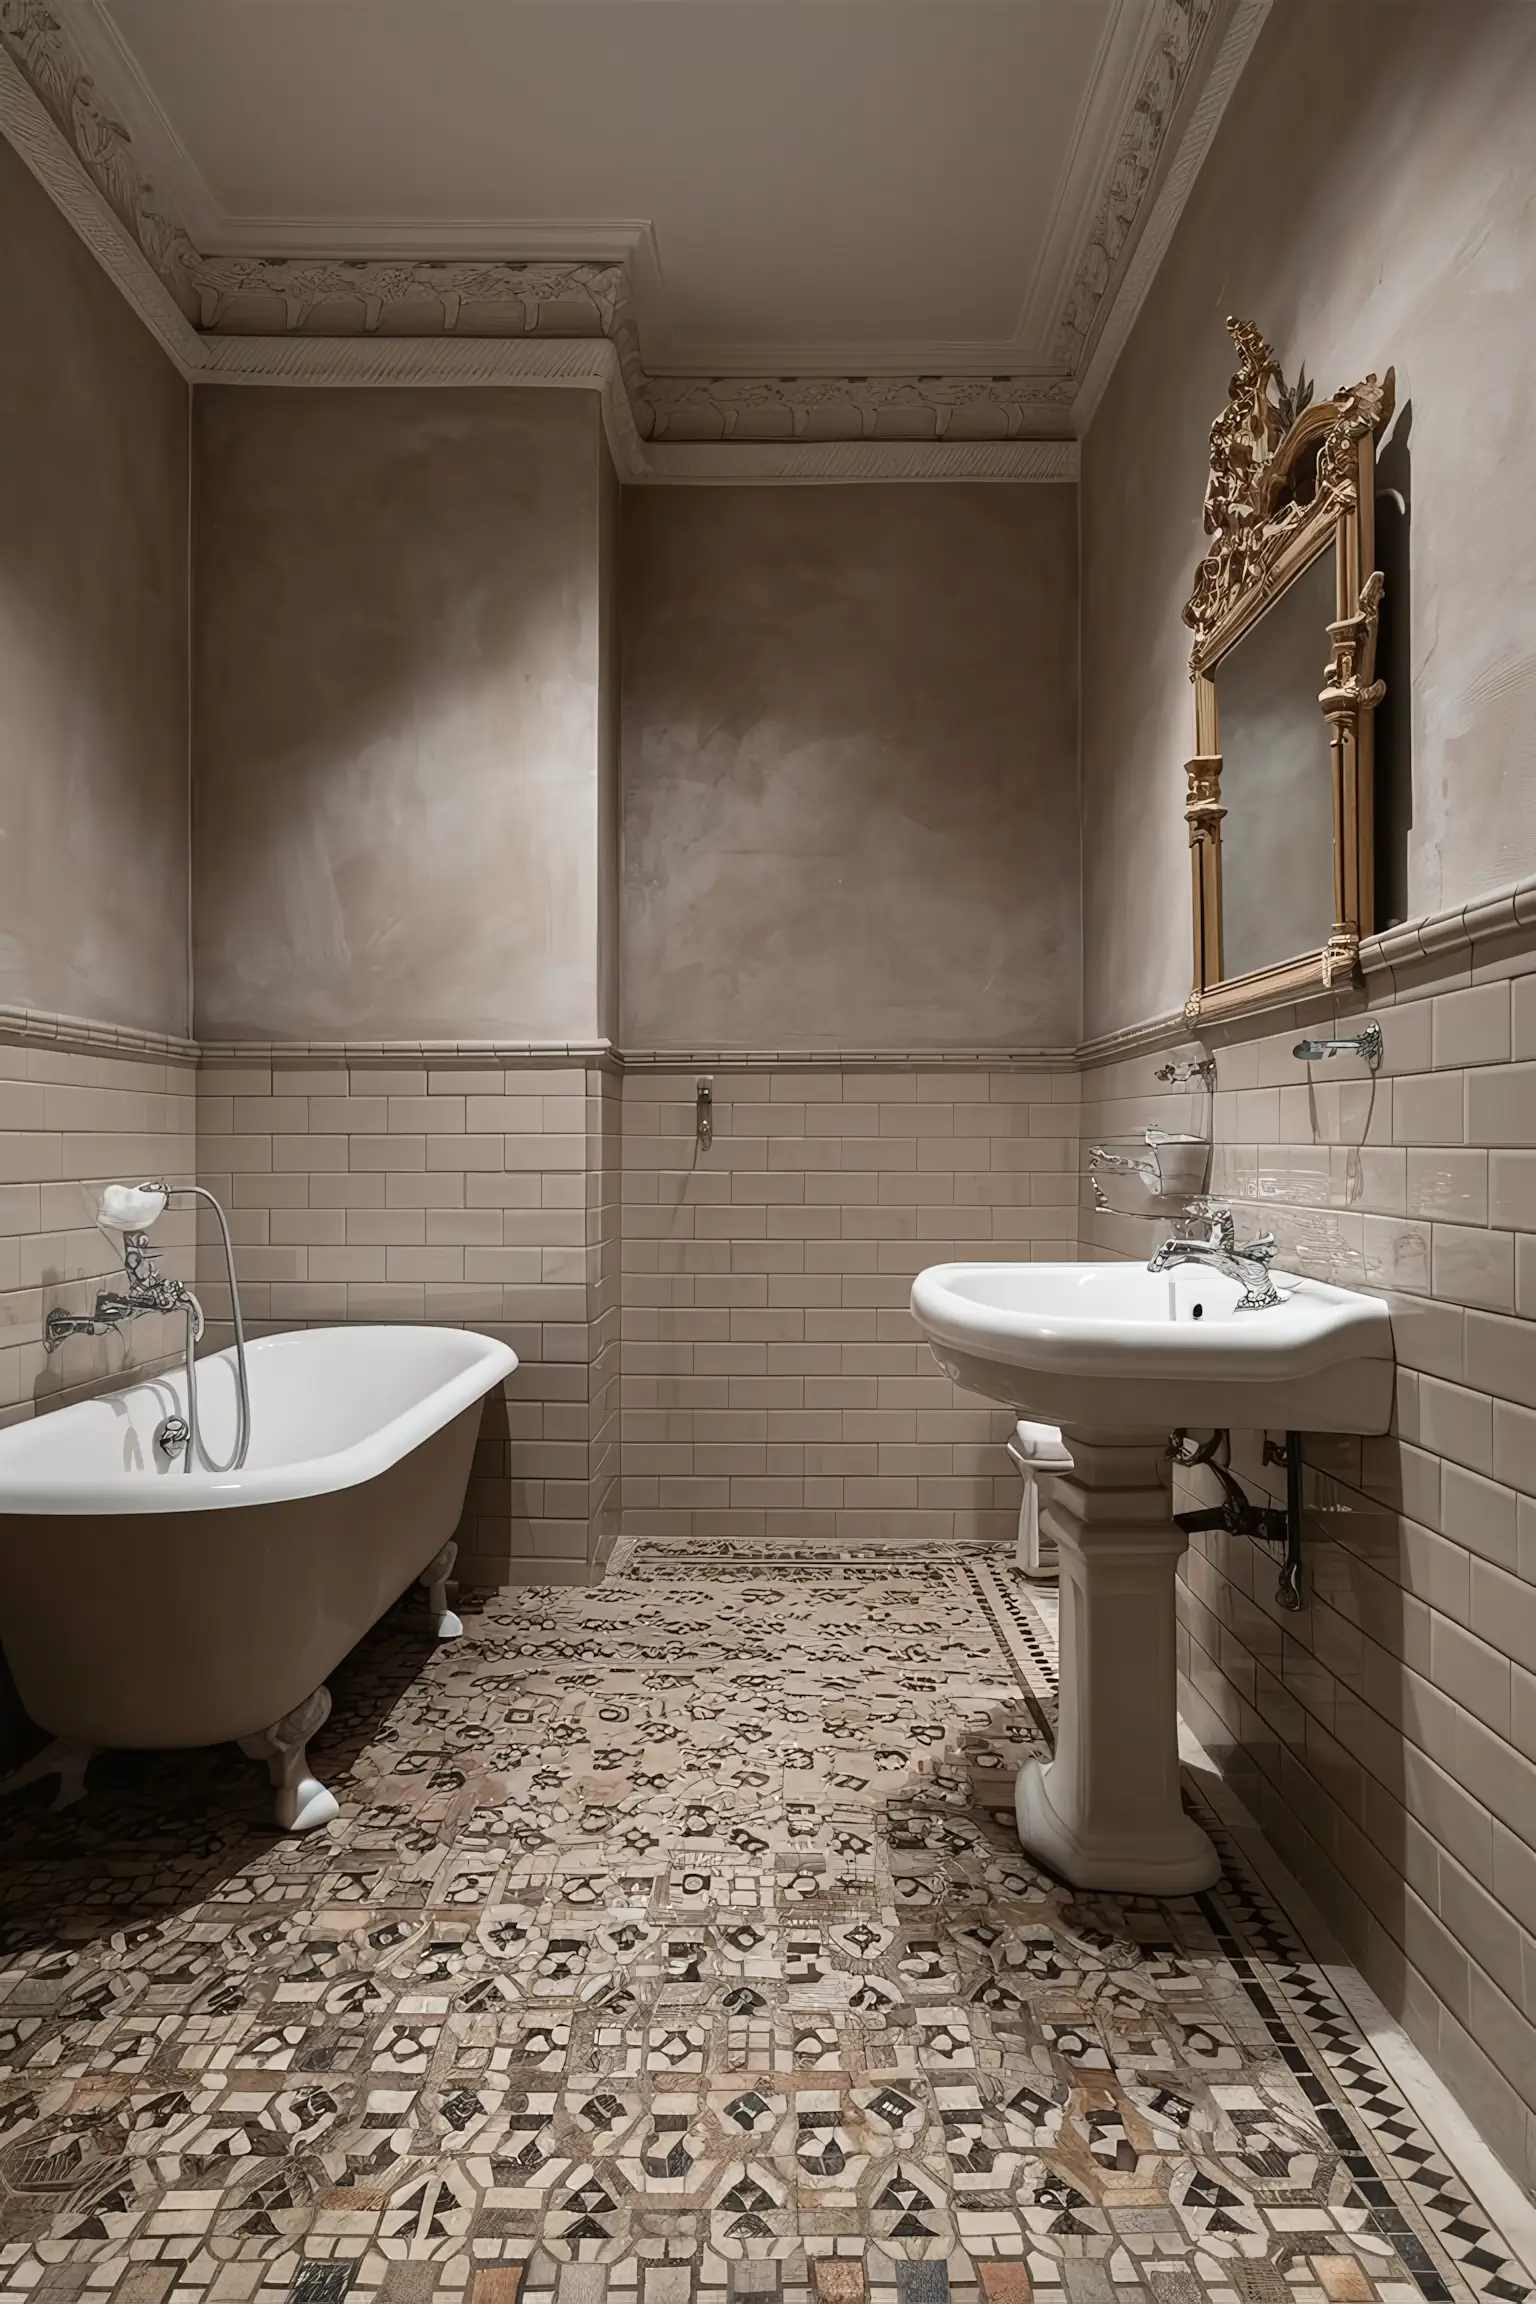 Traditional bathroom featuring classic tile designs with subway tiles on the walls and intricate mosaic patterns on the floor.